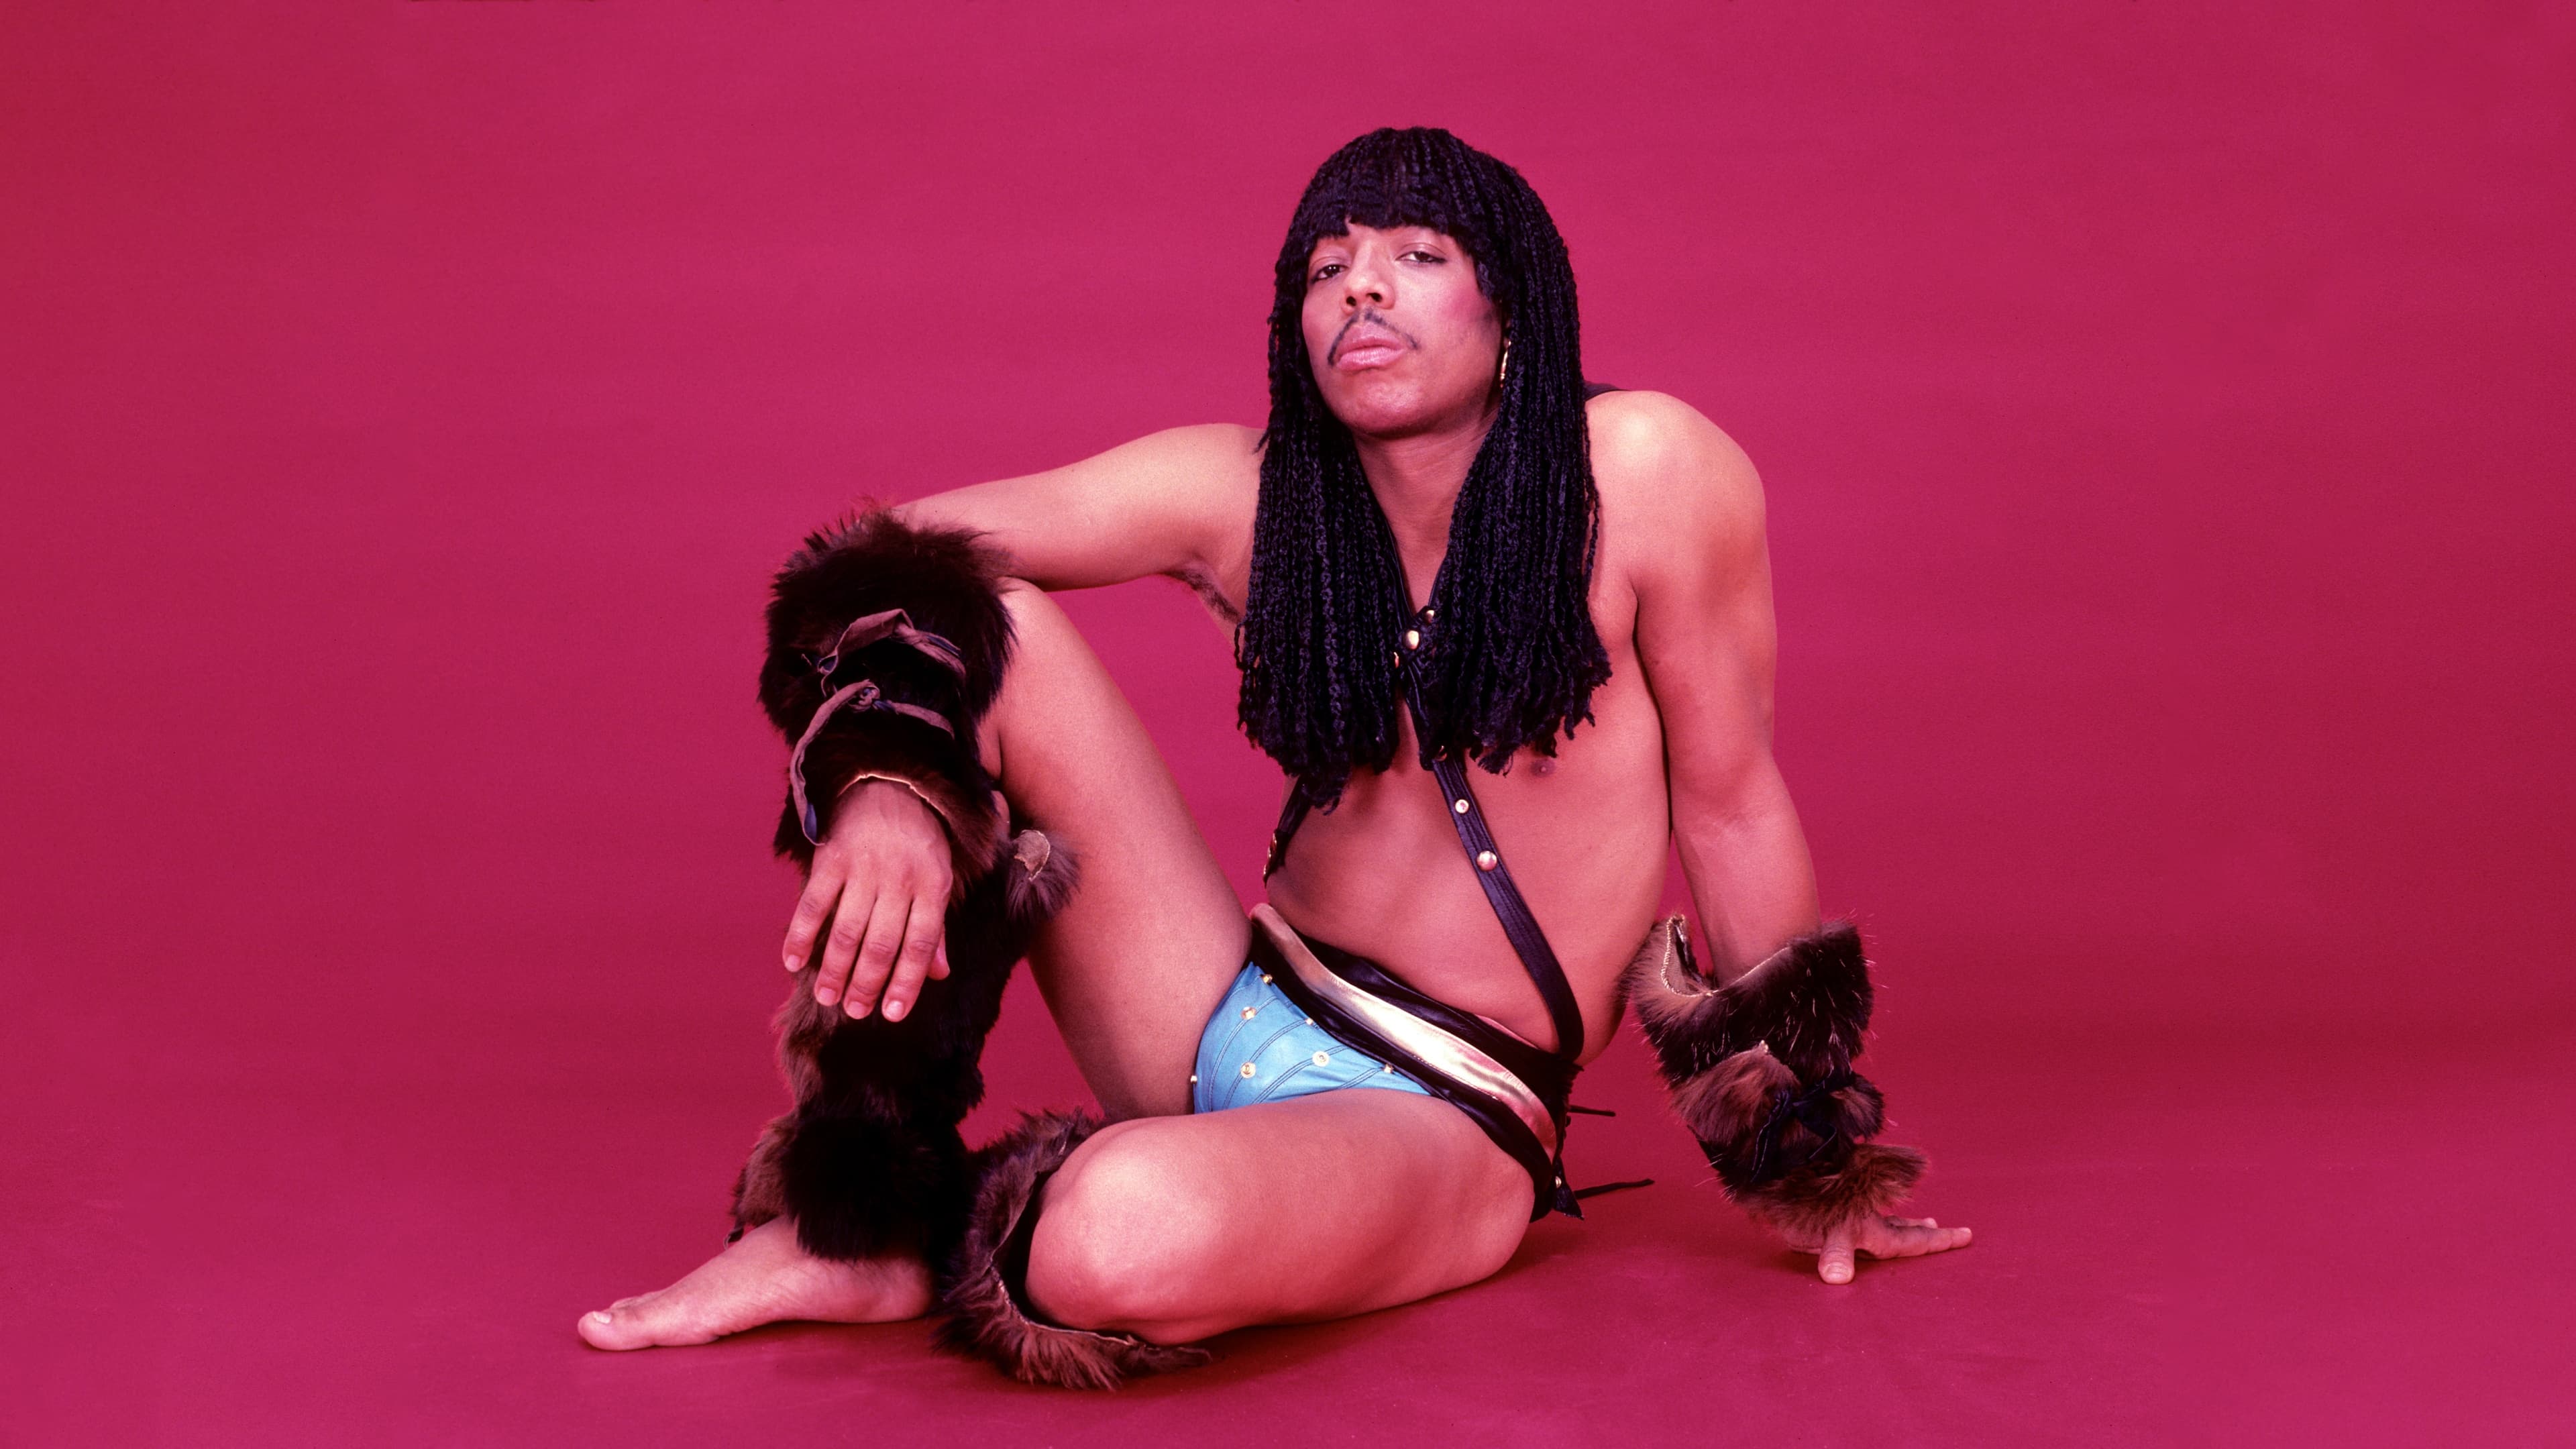 Bitchin’: The Sound and Fury of Rick James